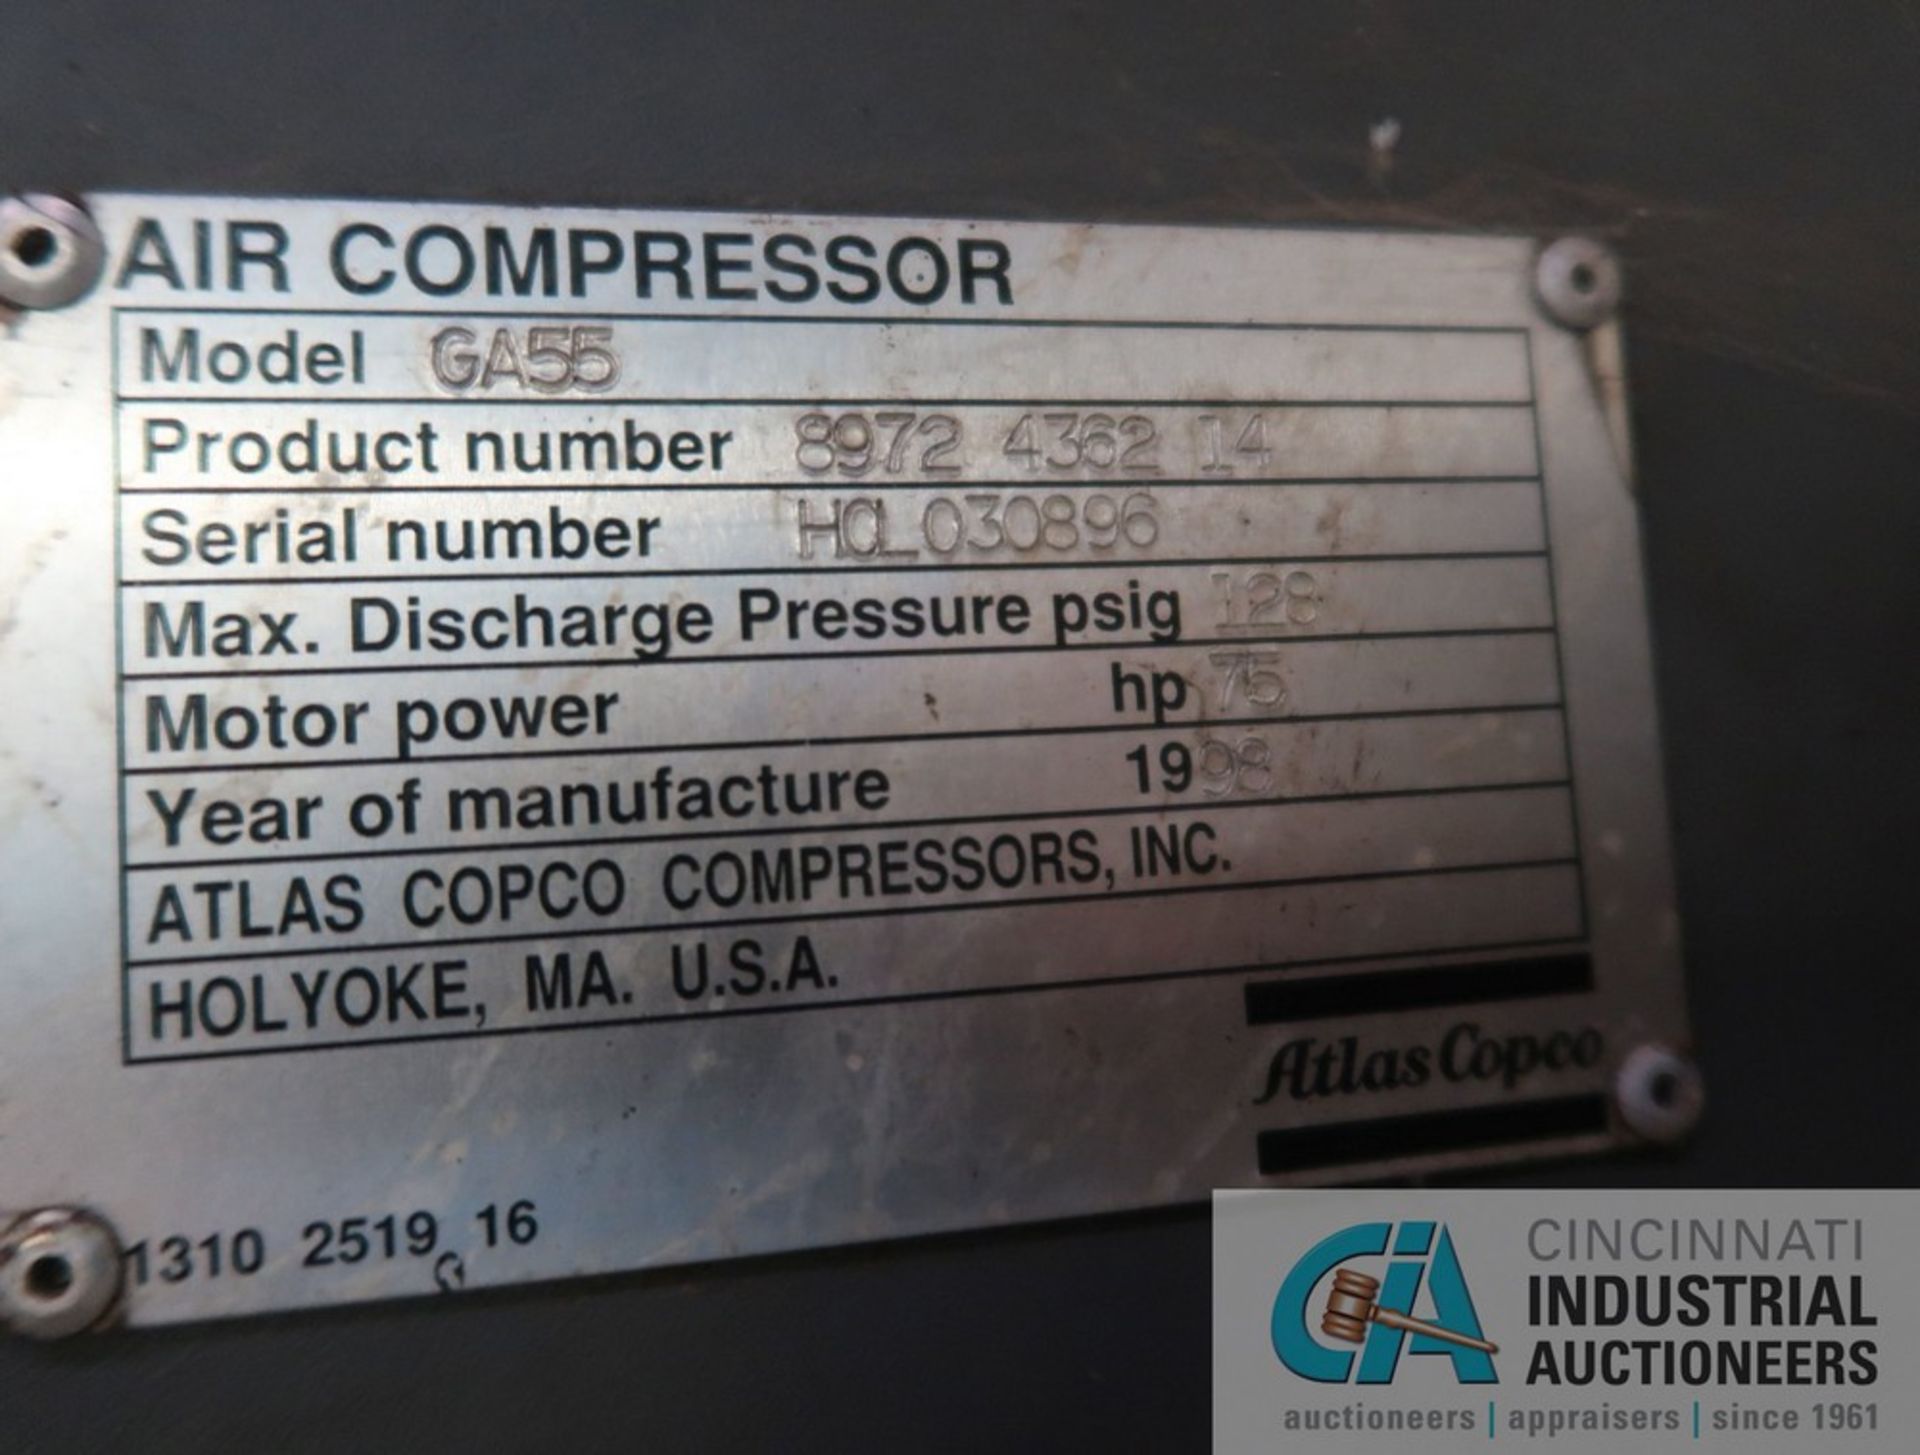 75 HP ATLAS-COPCO MODEL GA55 STATIONARY SINGLE STAGE OIL INJECTED SCREW AIR COMPRESSOR; S/N HOLO0896 - Image 4 of 4